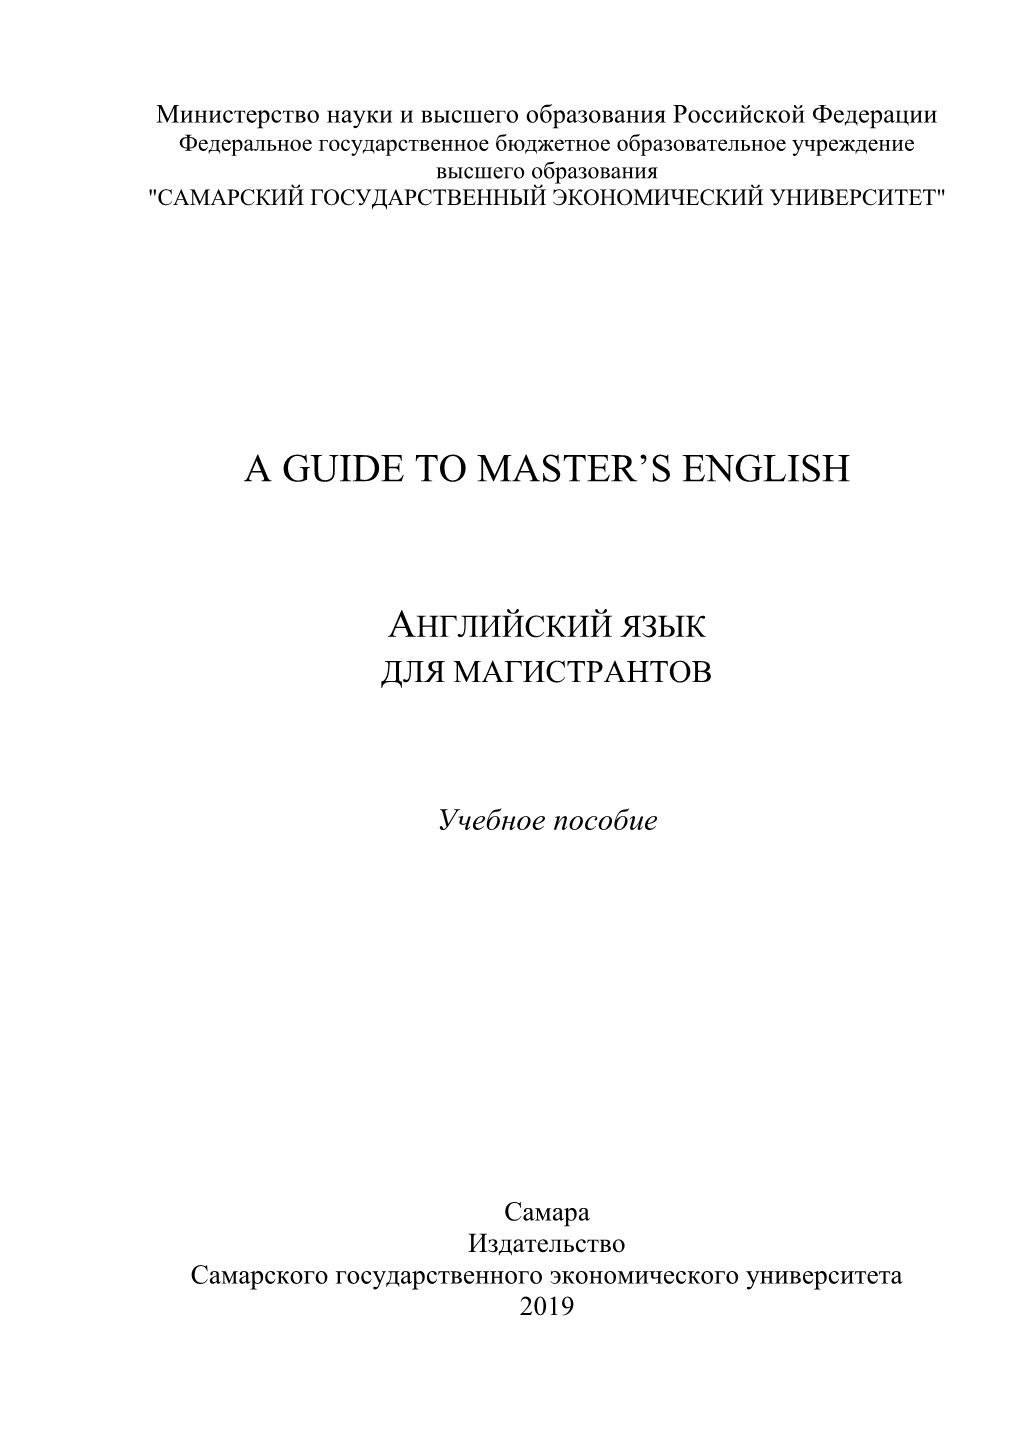 A Guide to Master's English